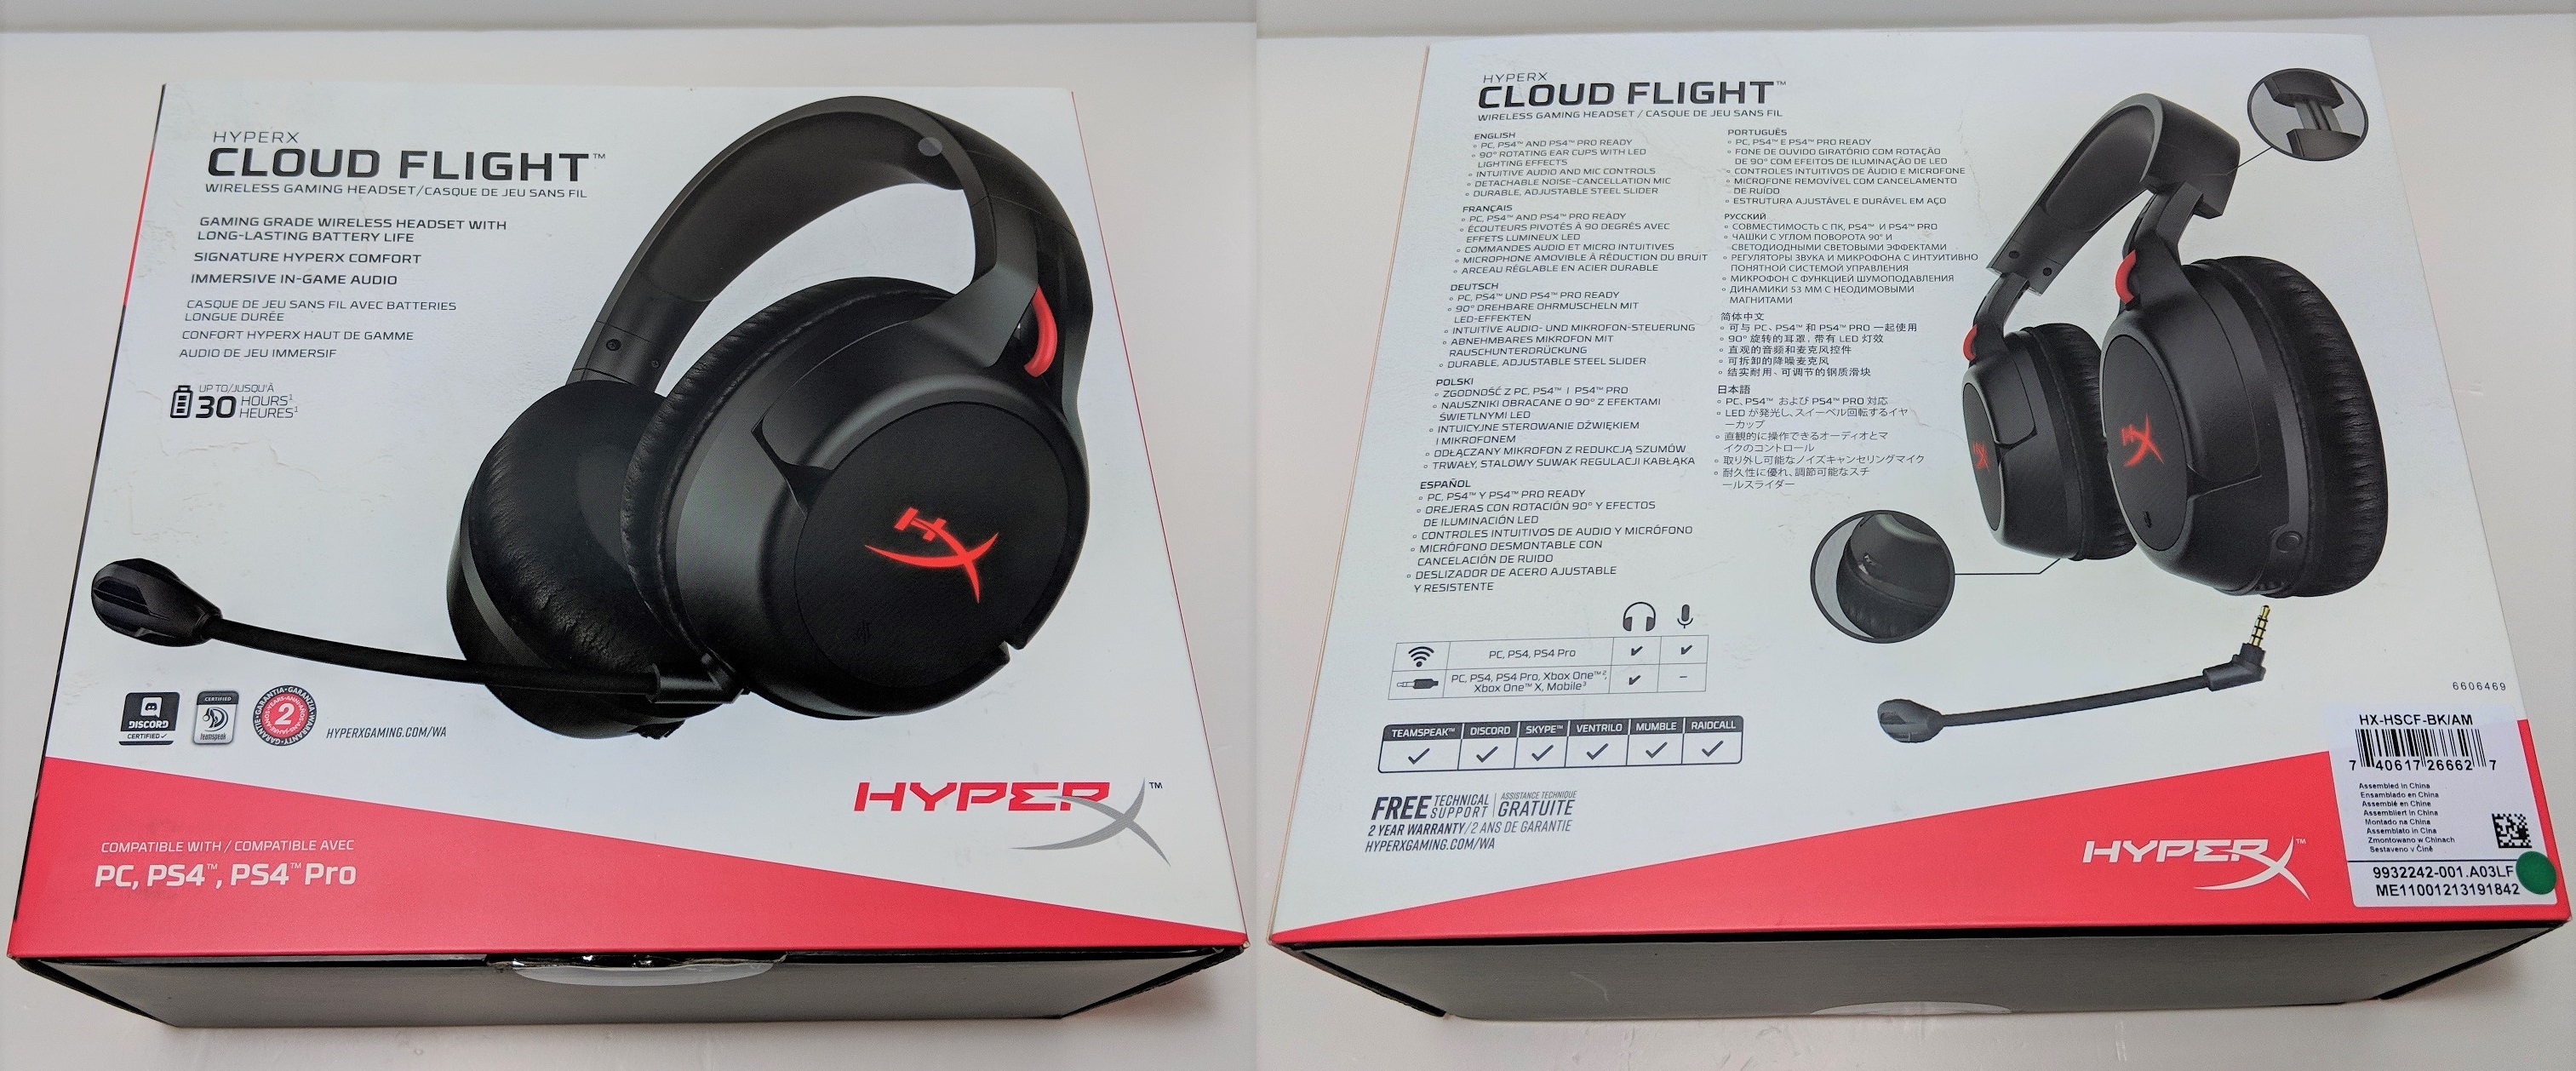 Unboxing And Review Of Hyperx Cloud Flight Wireless Gaming Headset Unbxtech